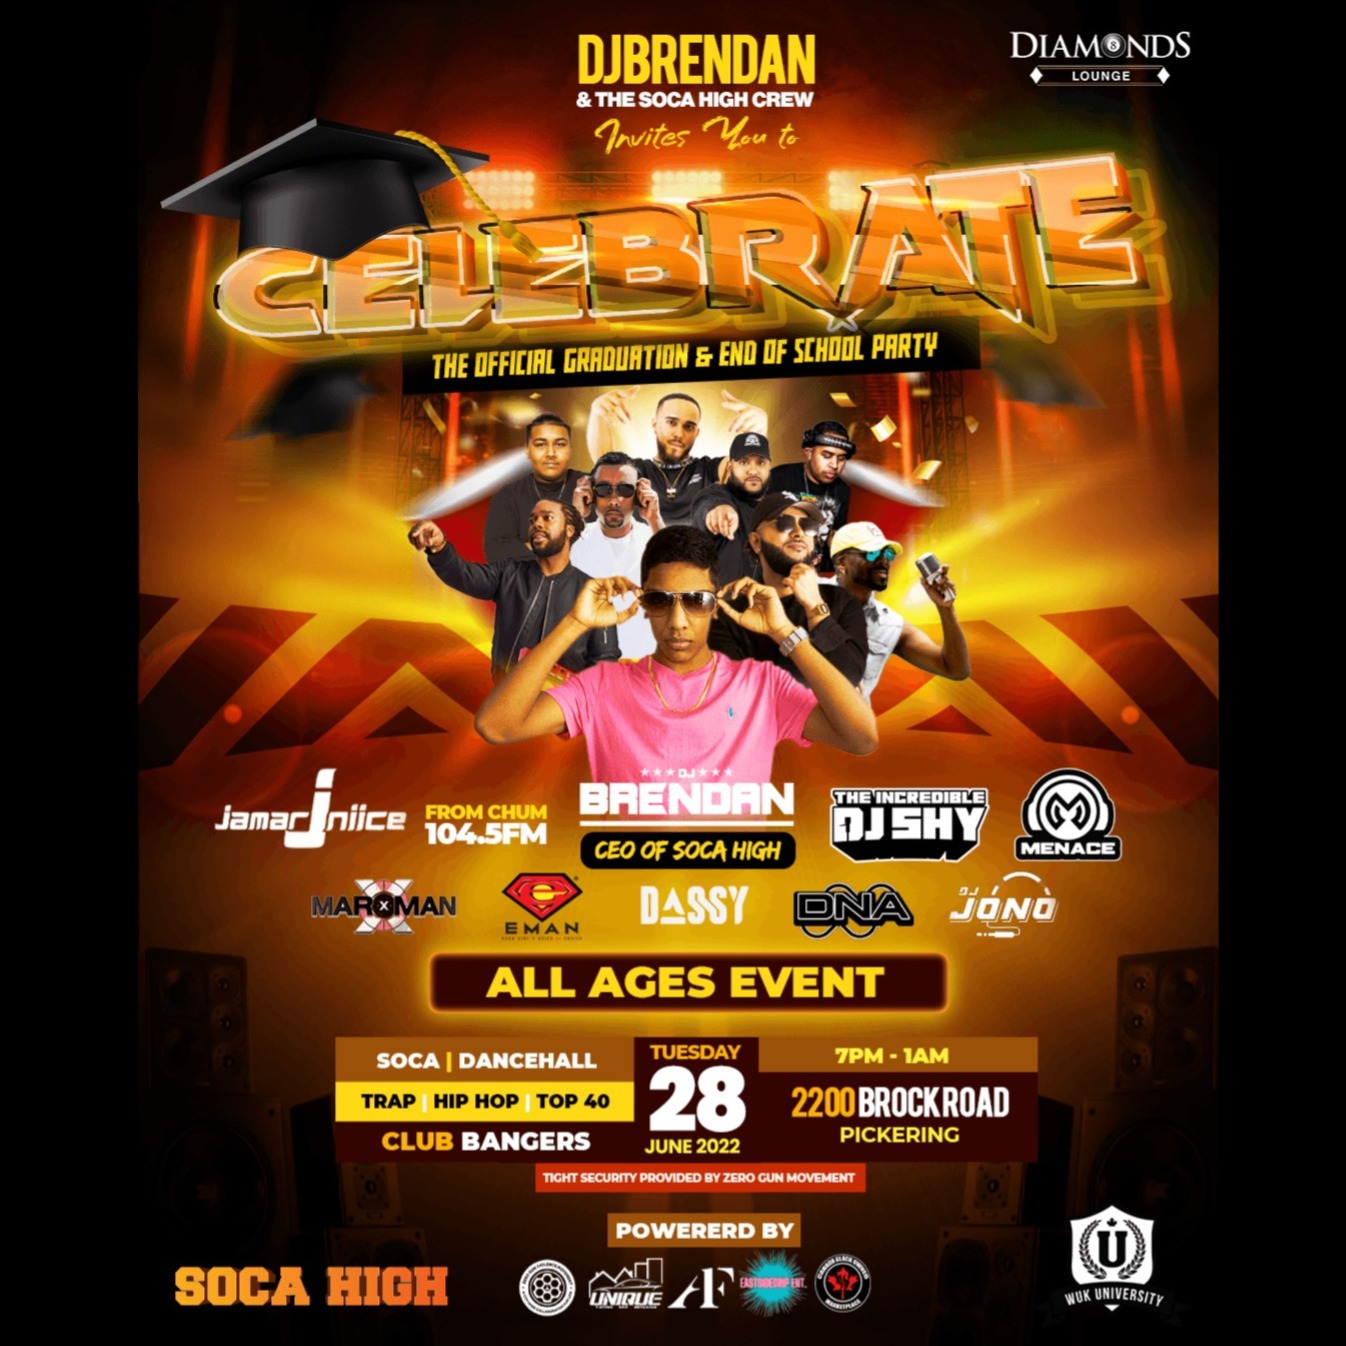 Celebrate - The Official Graduation and End of School Party